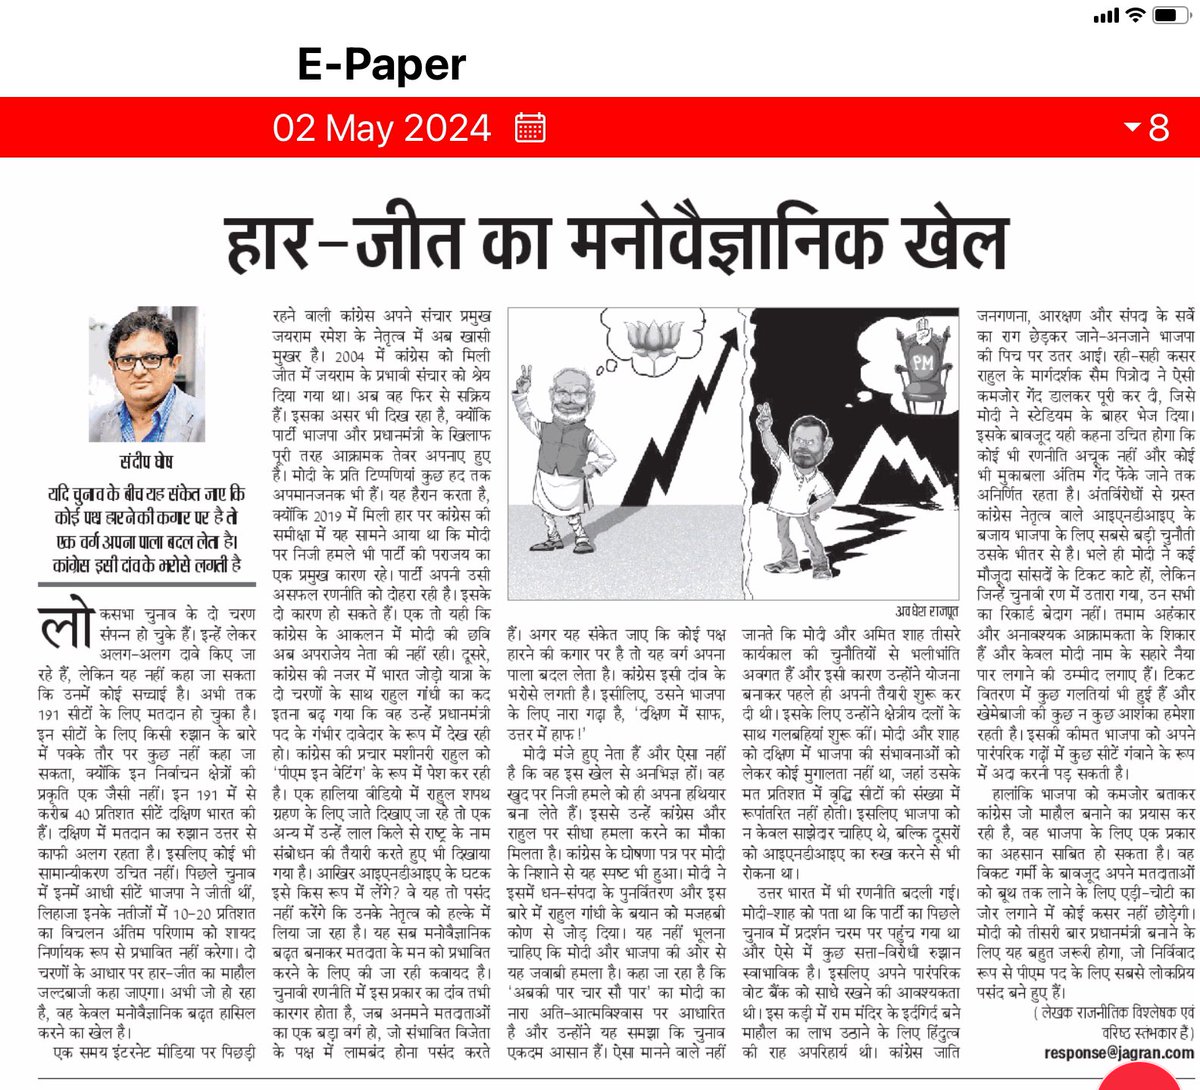 My Op-Ed in @JagranNews today on the PsyOps and mind-games being played by political parties to influence voting patterns in the #LokSabhaElections2024  Do let me know what you think. @JagranNews #LokSabhaPolls